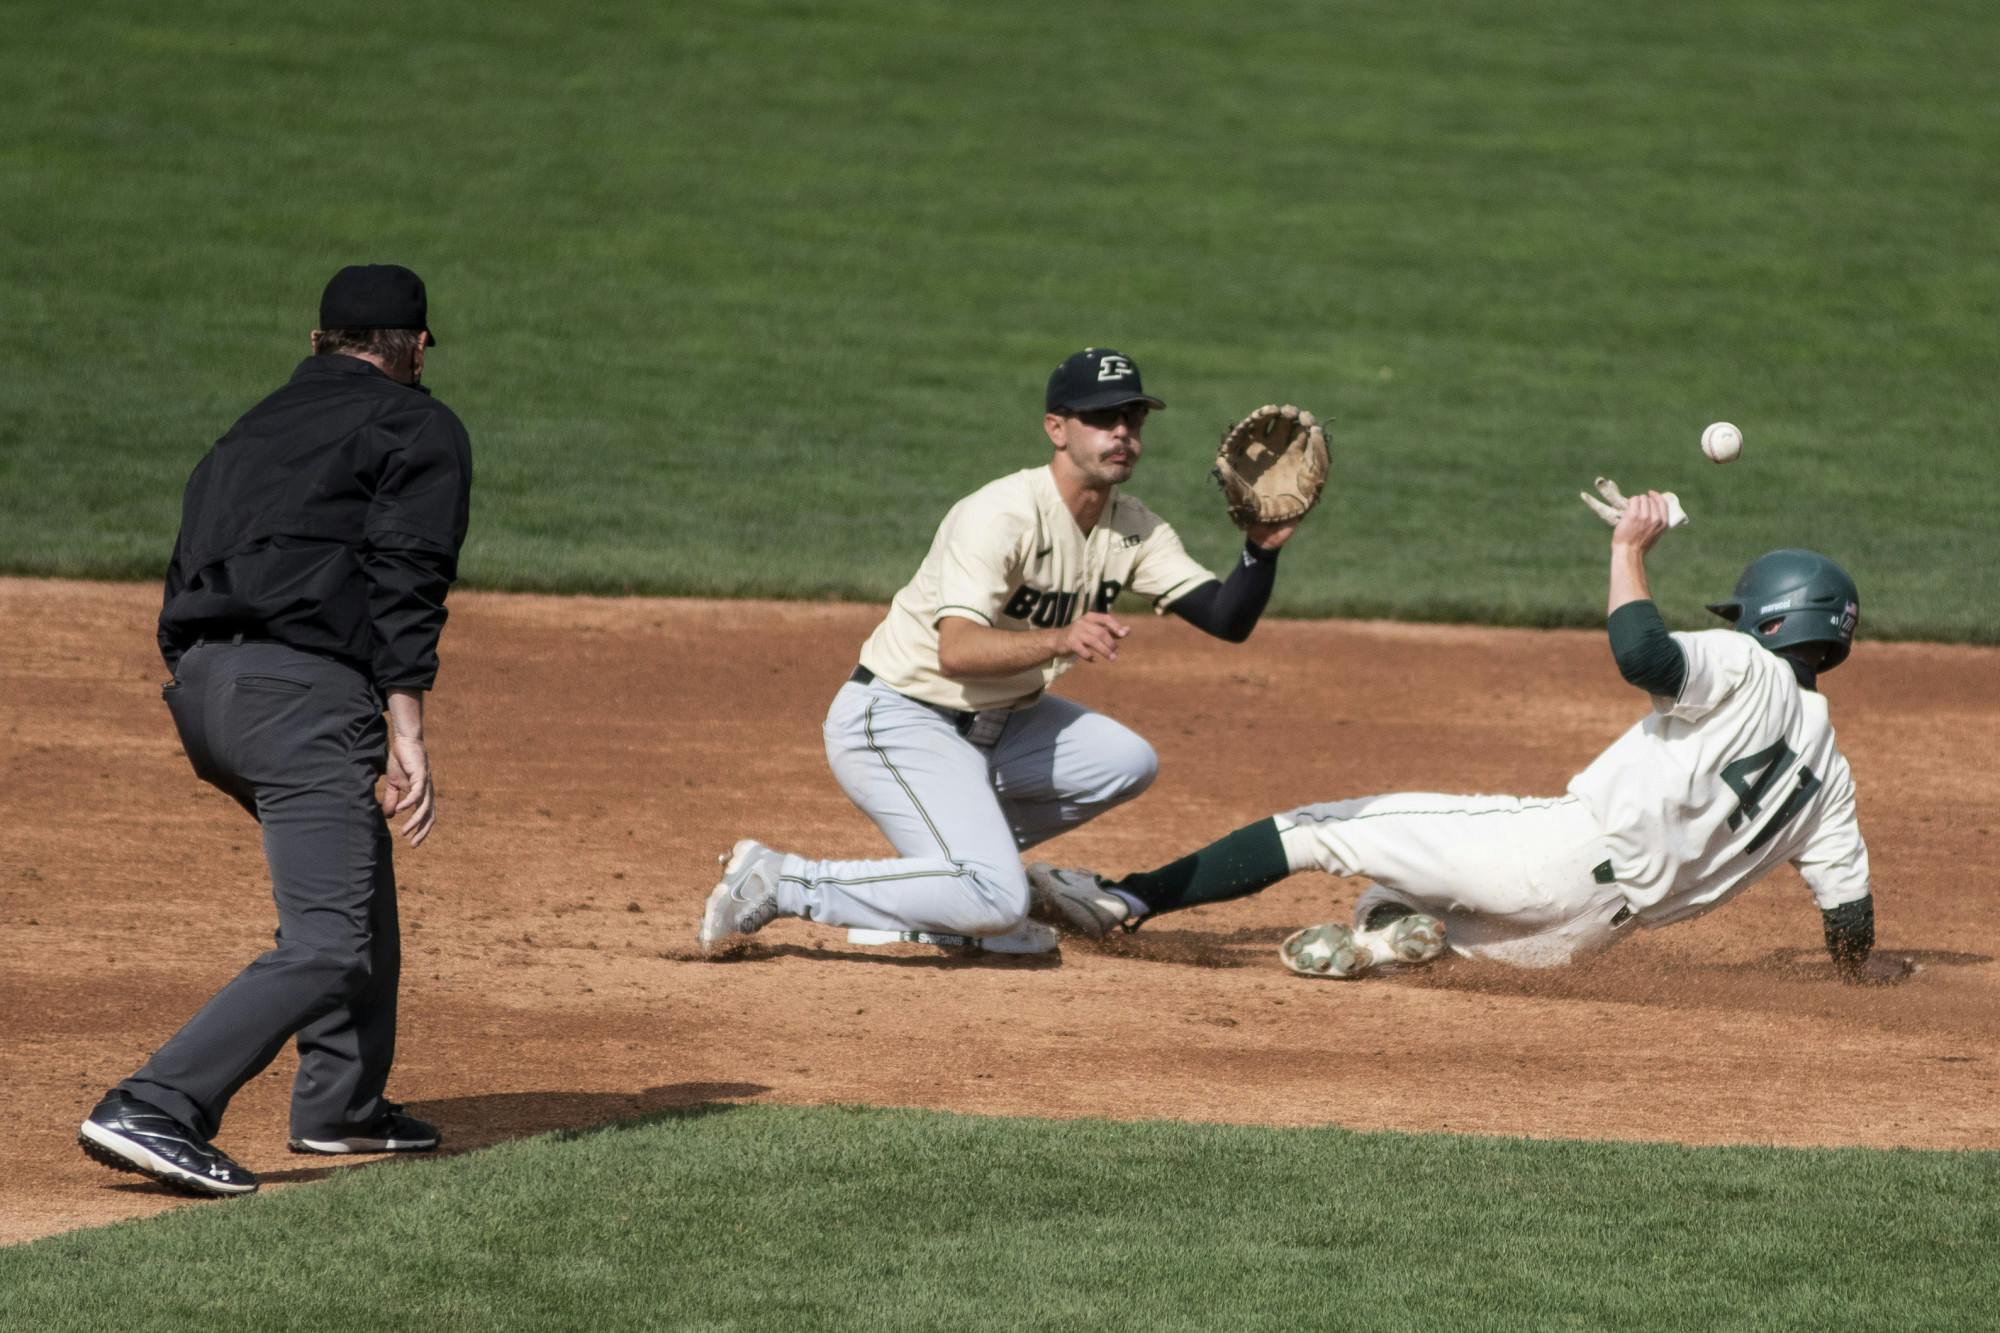 <p>Freshman infielder Mitch Jebb (41) slides into second base as the ball comes his way during the game against Purdue on April 11, 2021, at McLane Stadium. The Spartans defeated the Boilermakers, 5-2.</p>